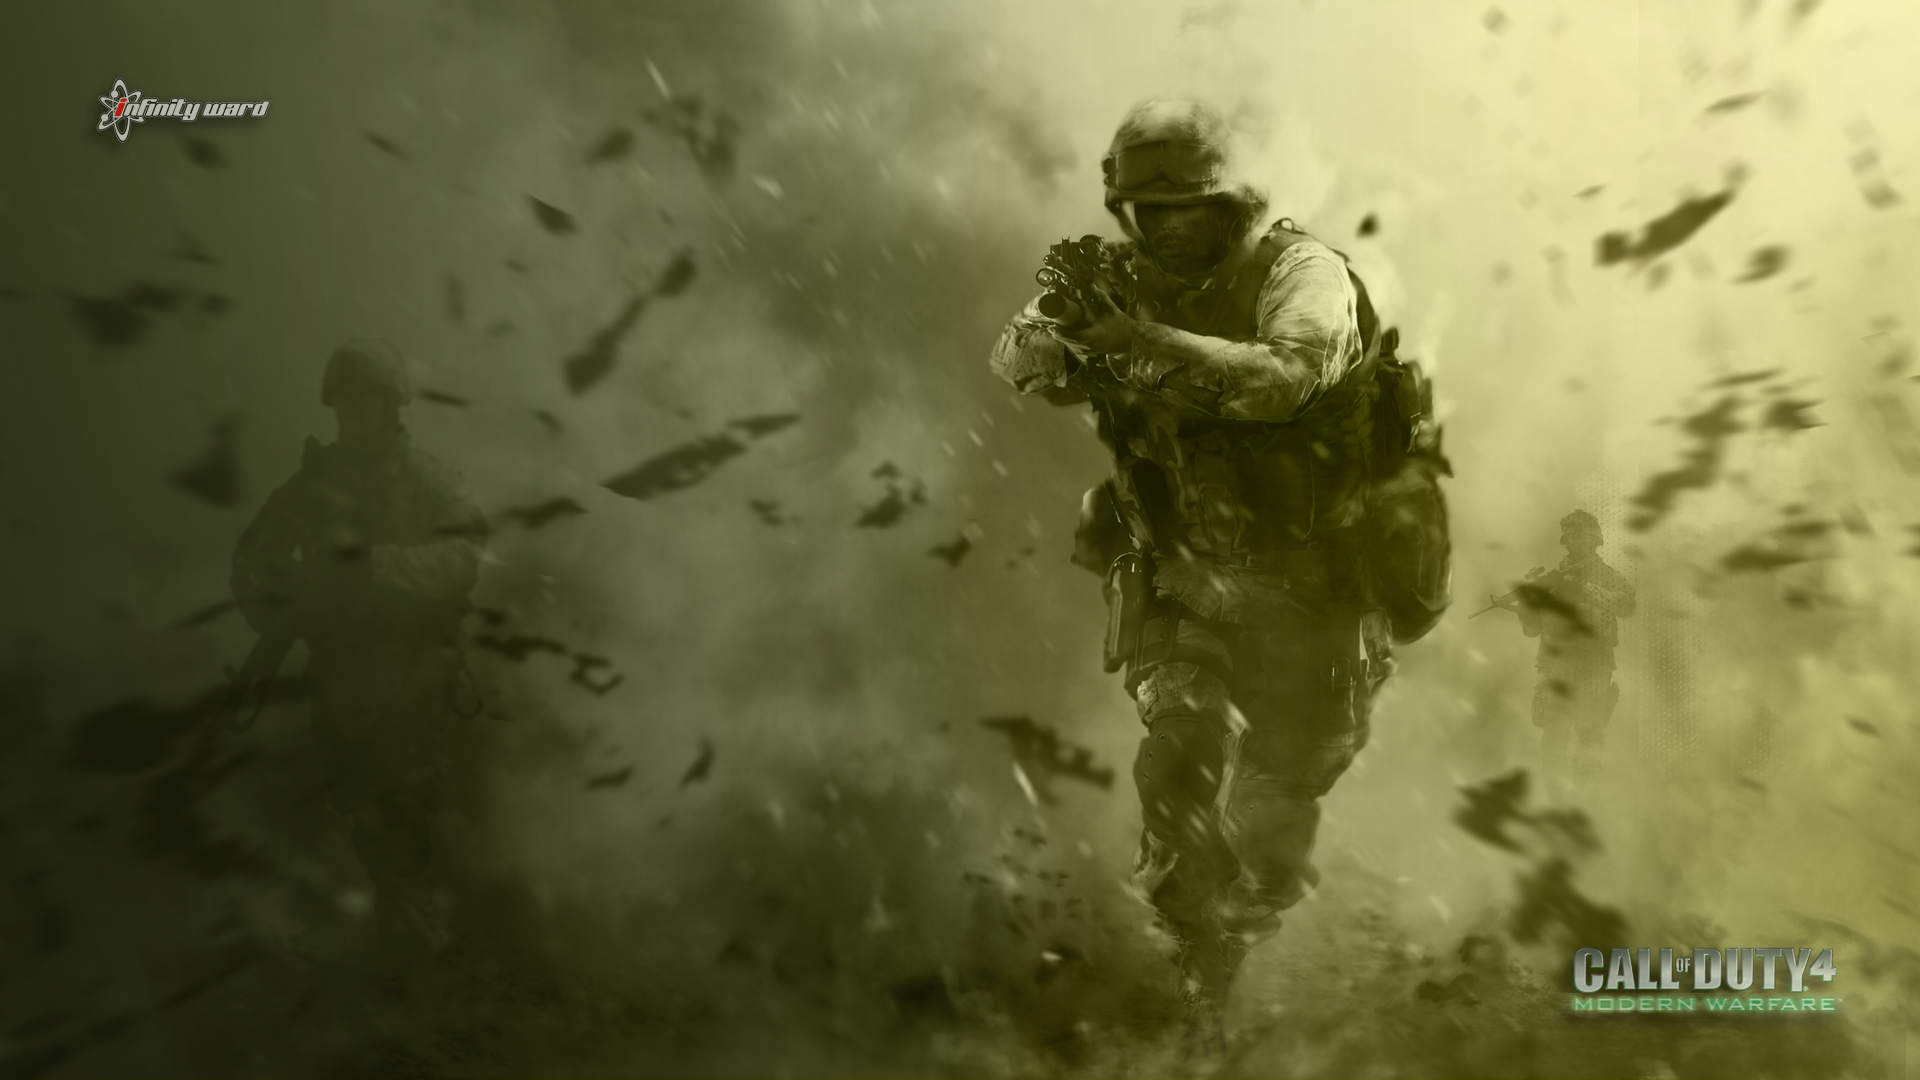 Call of Duty. Call of duty, Military wallpaper, Army wallpaper